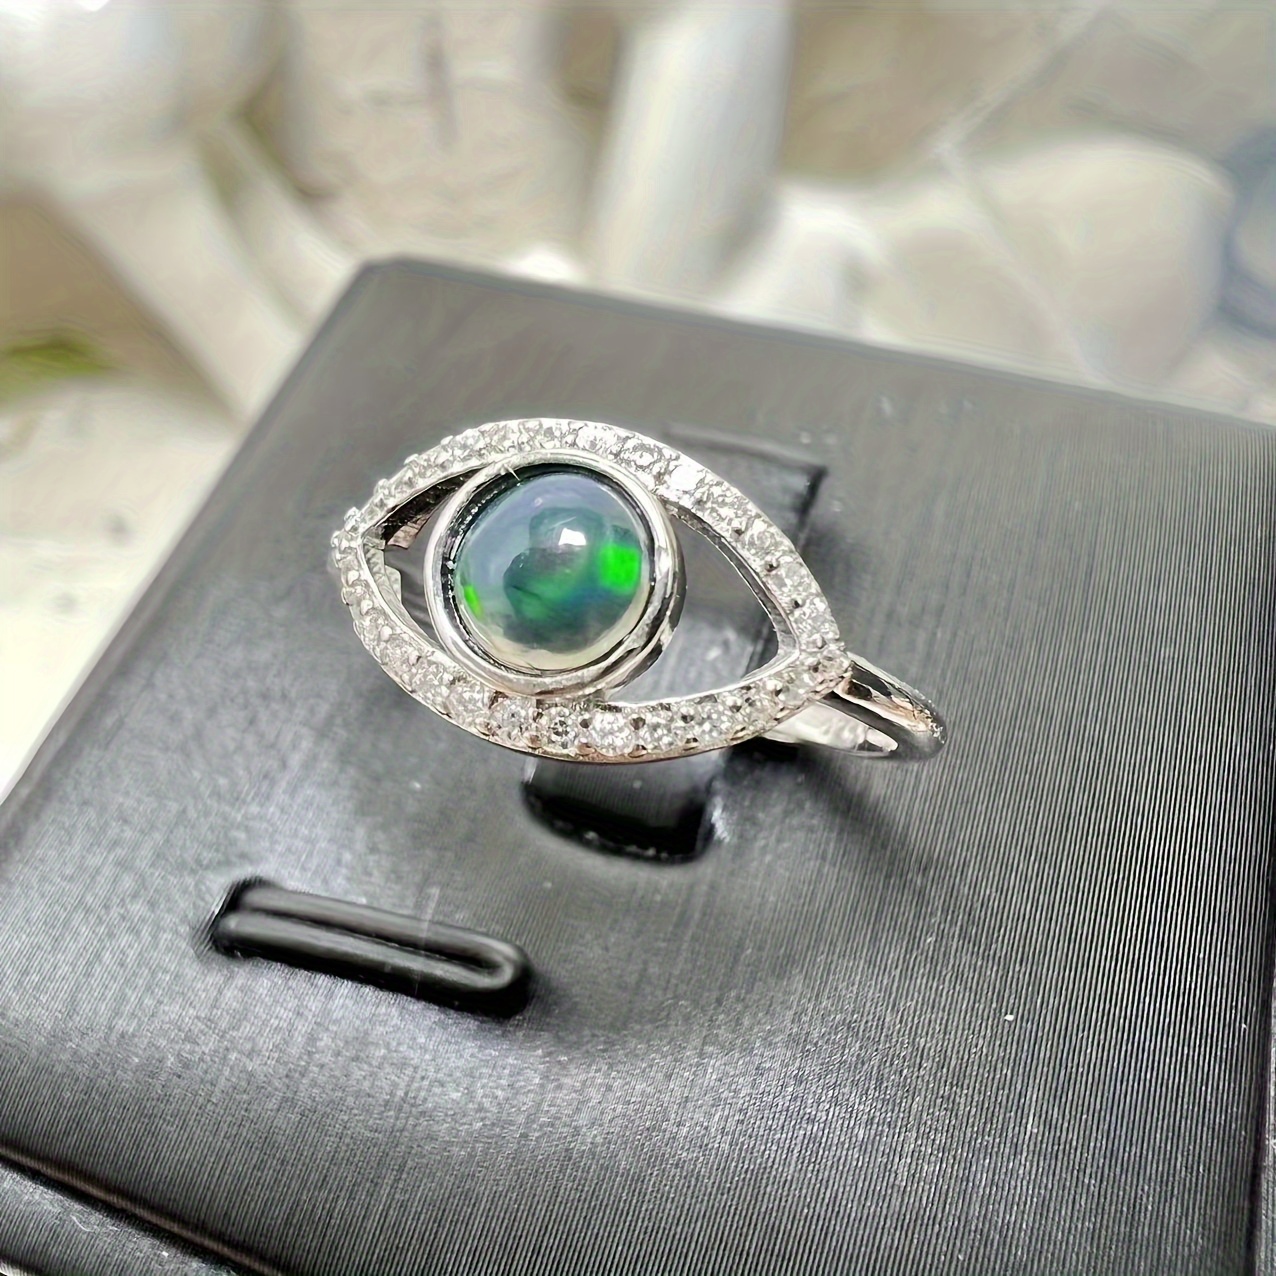 

1pc Natural Crystal Opal S925 Sterling Silver Ring, Distressed Vintage Style Devil's Eye Men's Ring, Silvery Ring Adjustable Ring